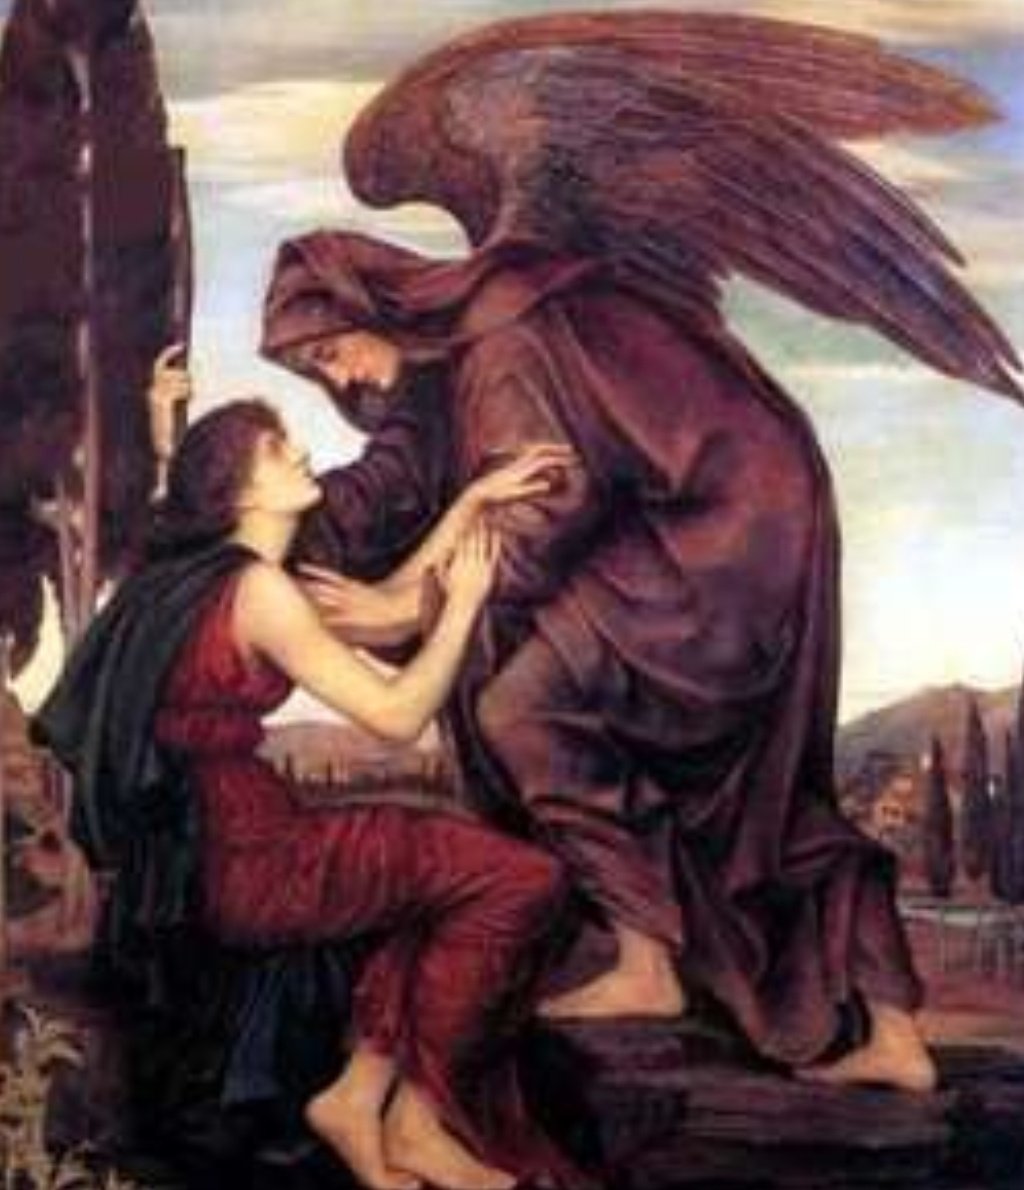 NEPHILIM (נְפִילִים, nefilim):Well-known in biblical myths, however Arab Pagans believed in them too. Described as 'fallen angels' that take upon the shape of humans on Earth, they were known to produce hybrid children. Abu Jurhum of the Jurhum tribe, was one such hybrid child.